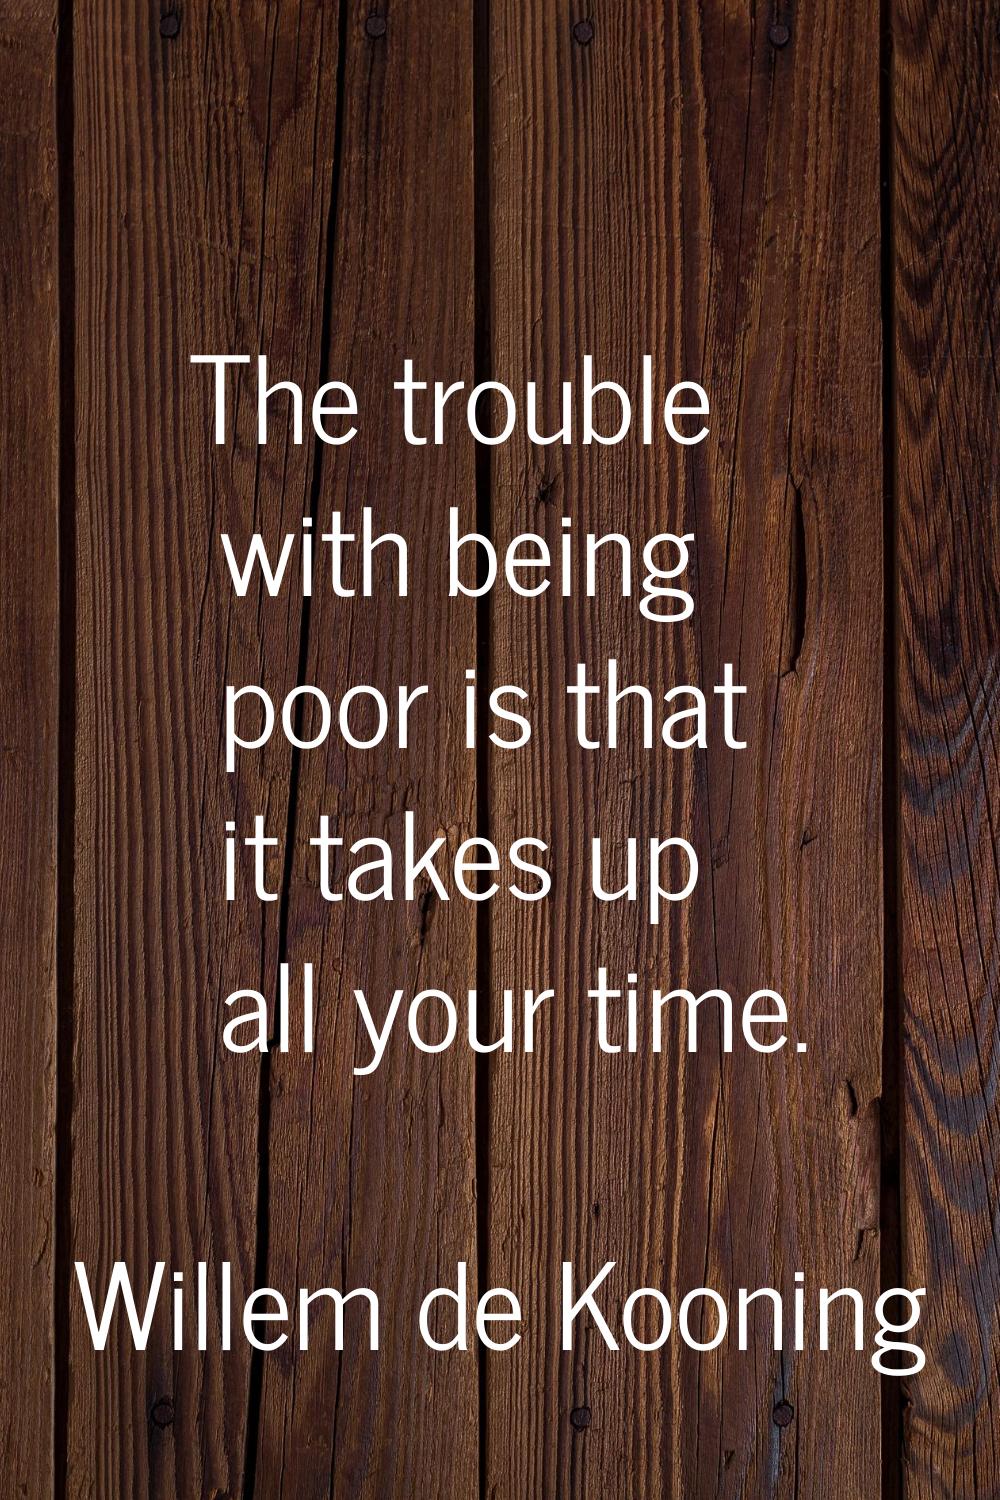 The trouble with being poor is that it takes up all your time.